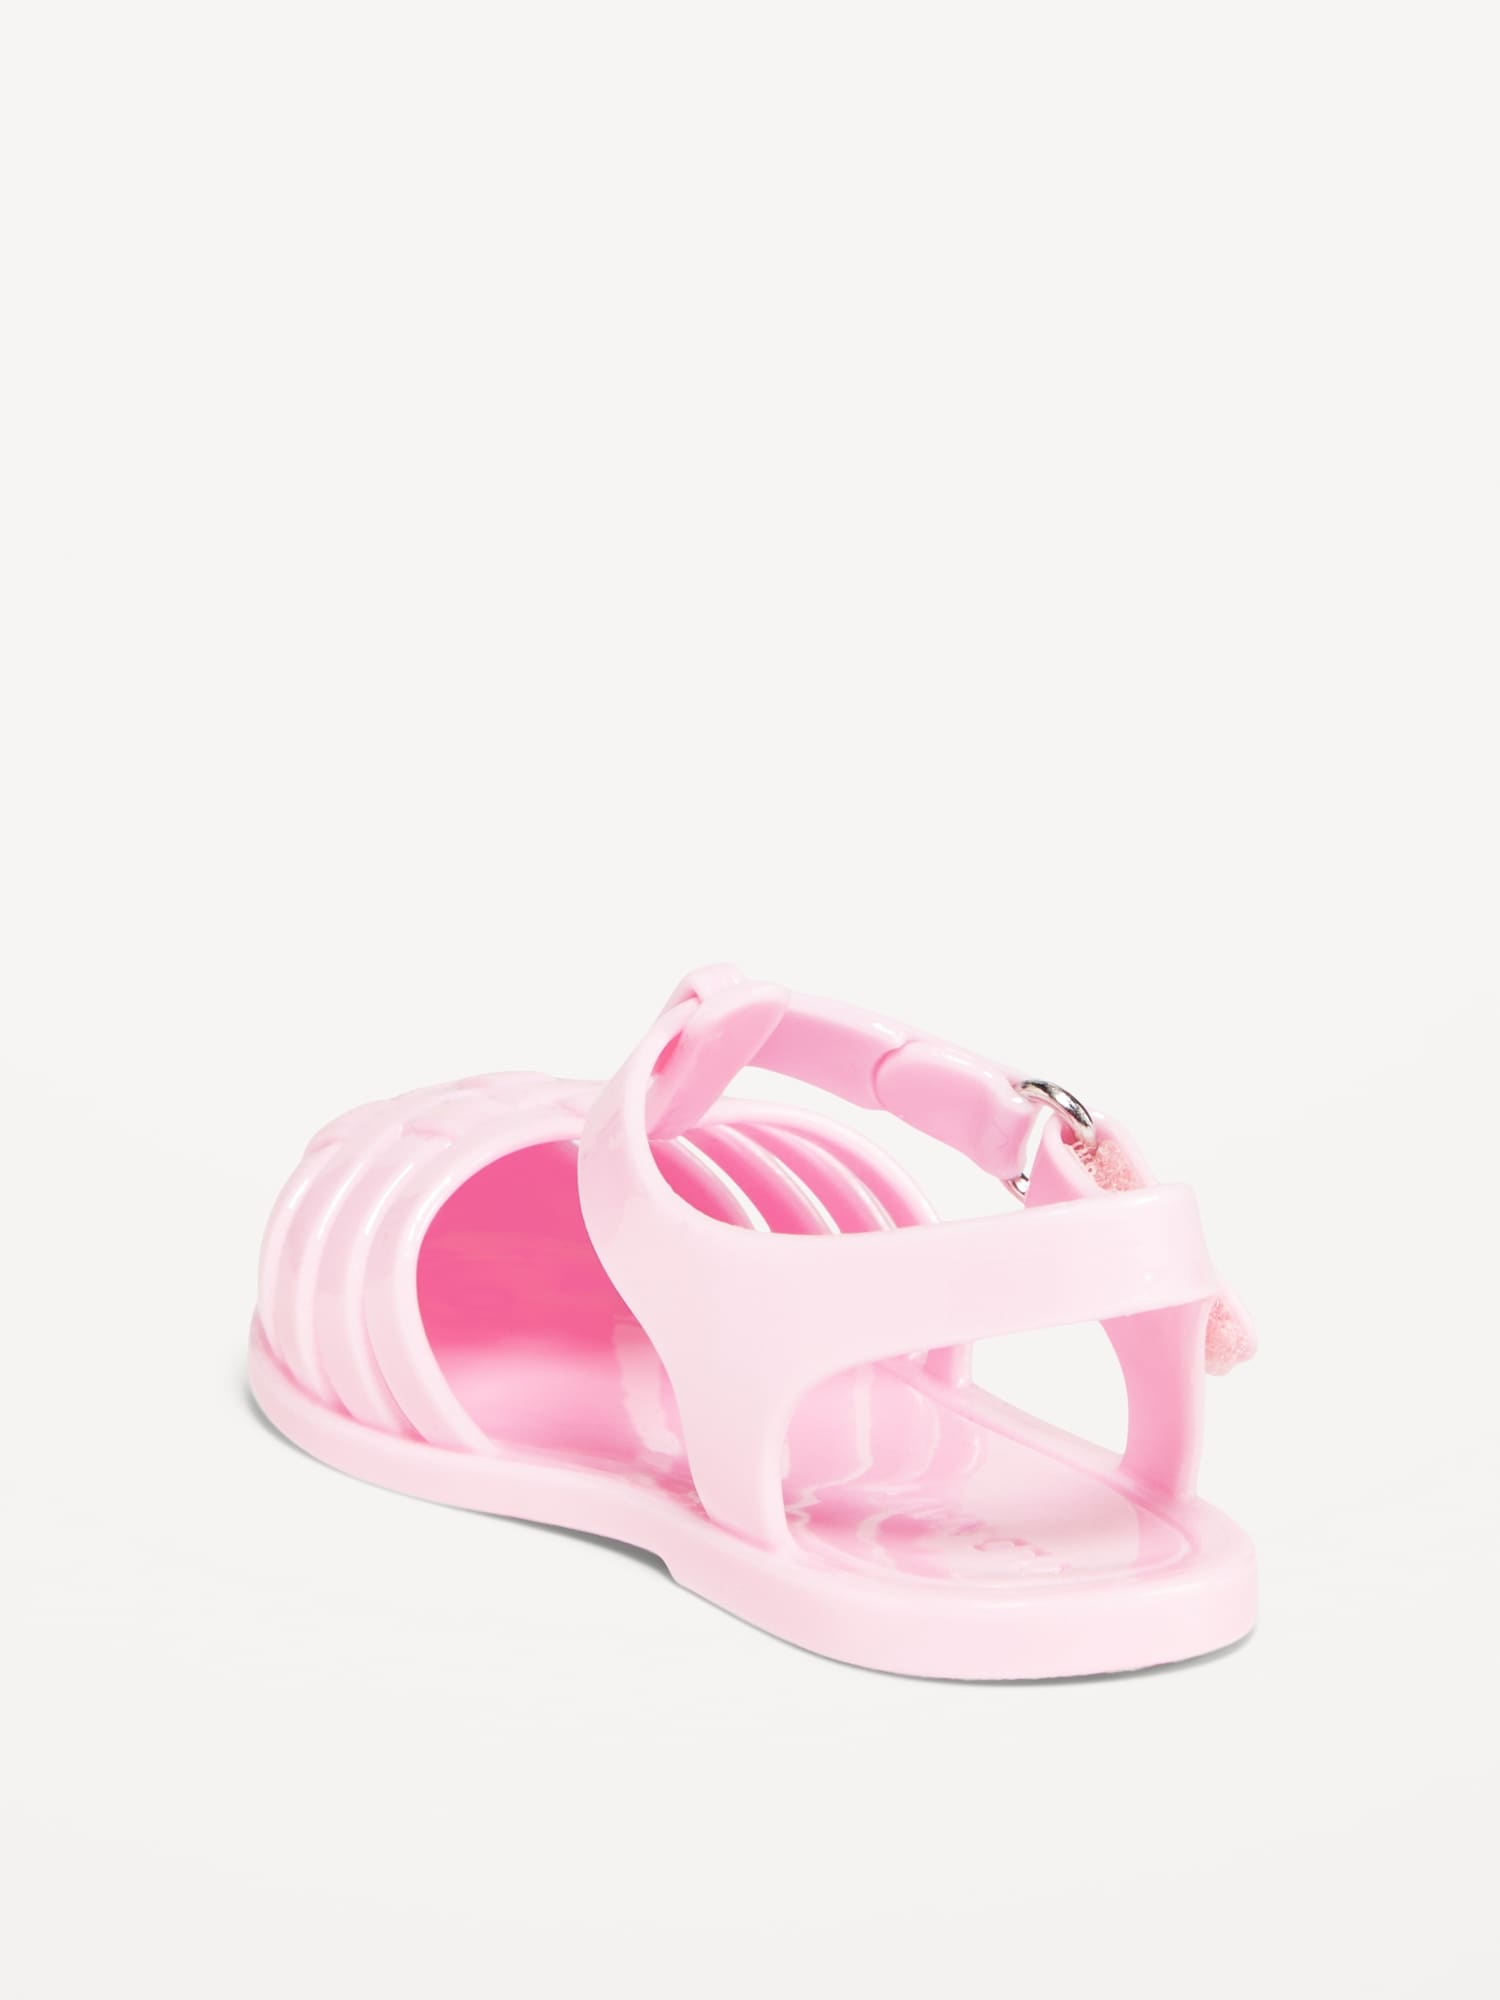 Jelly Fisherman Sandals for Baby | Old Navy